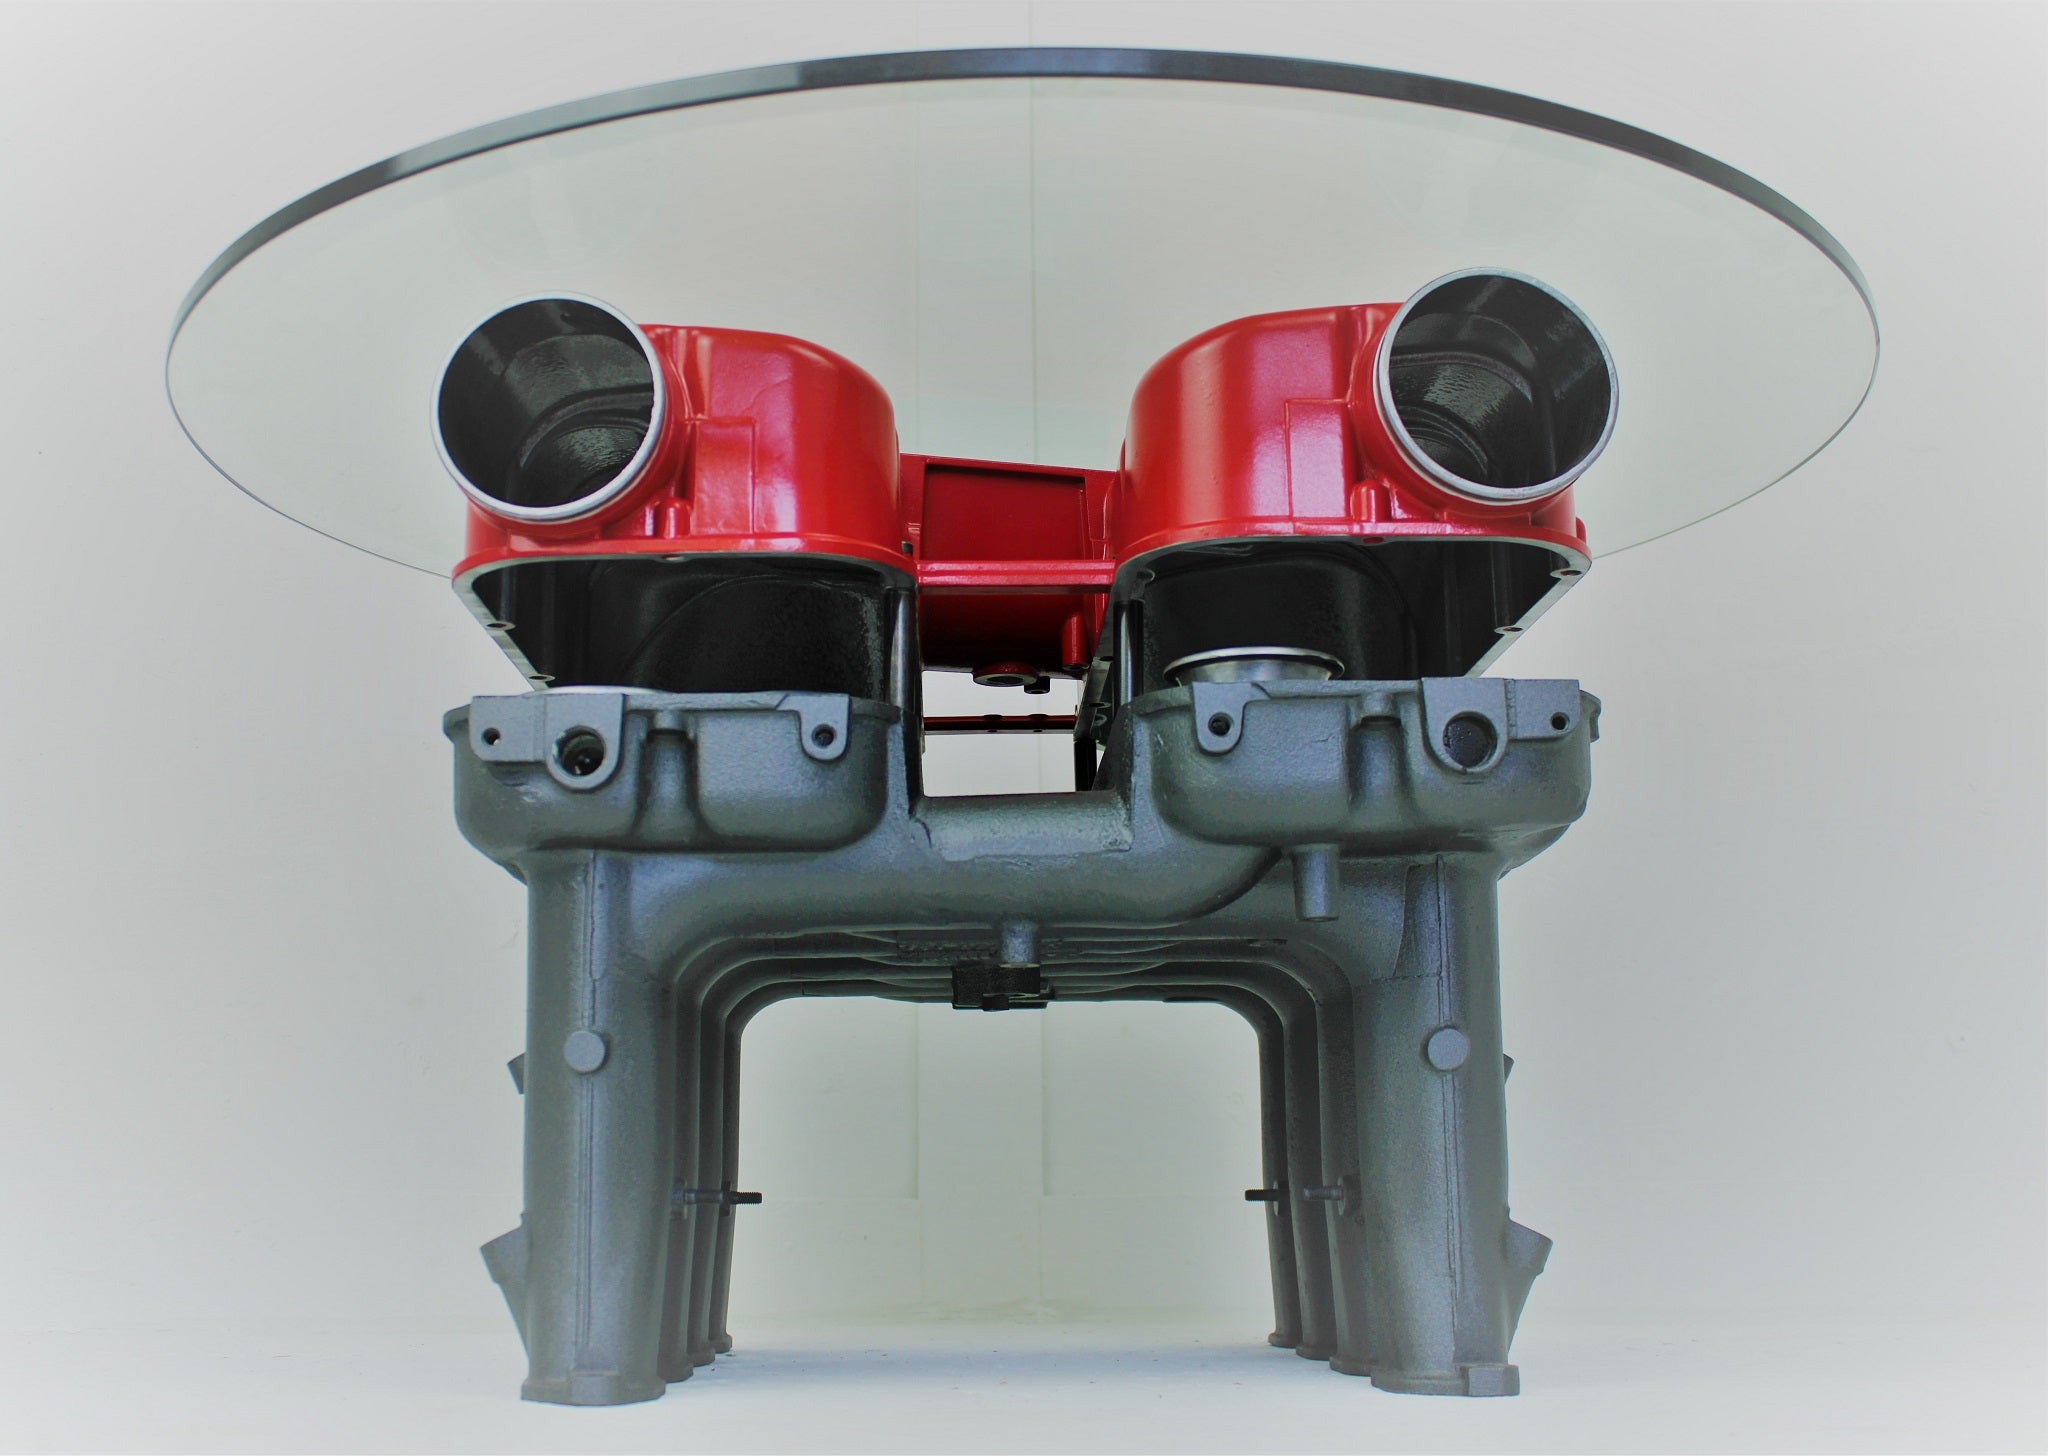 Lower view of a Ferrari intake manifold table, finished in red and gunmetal gray with a round glass top.